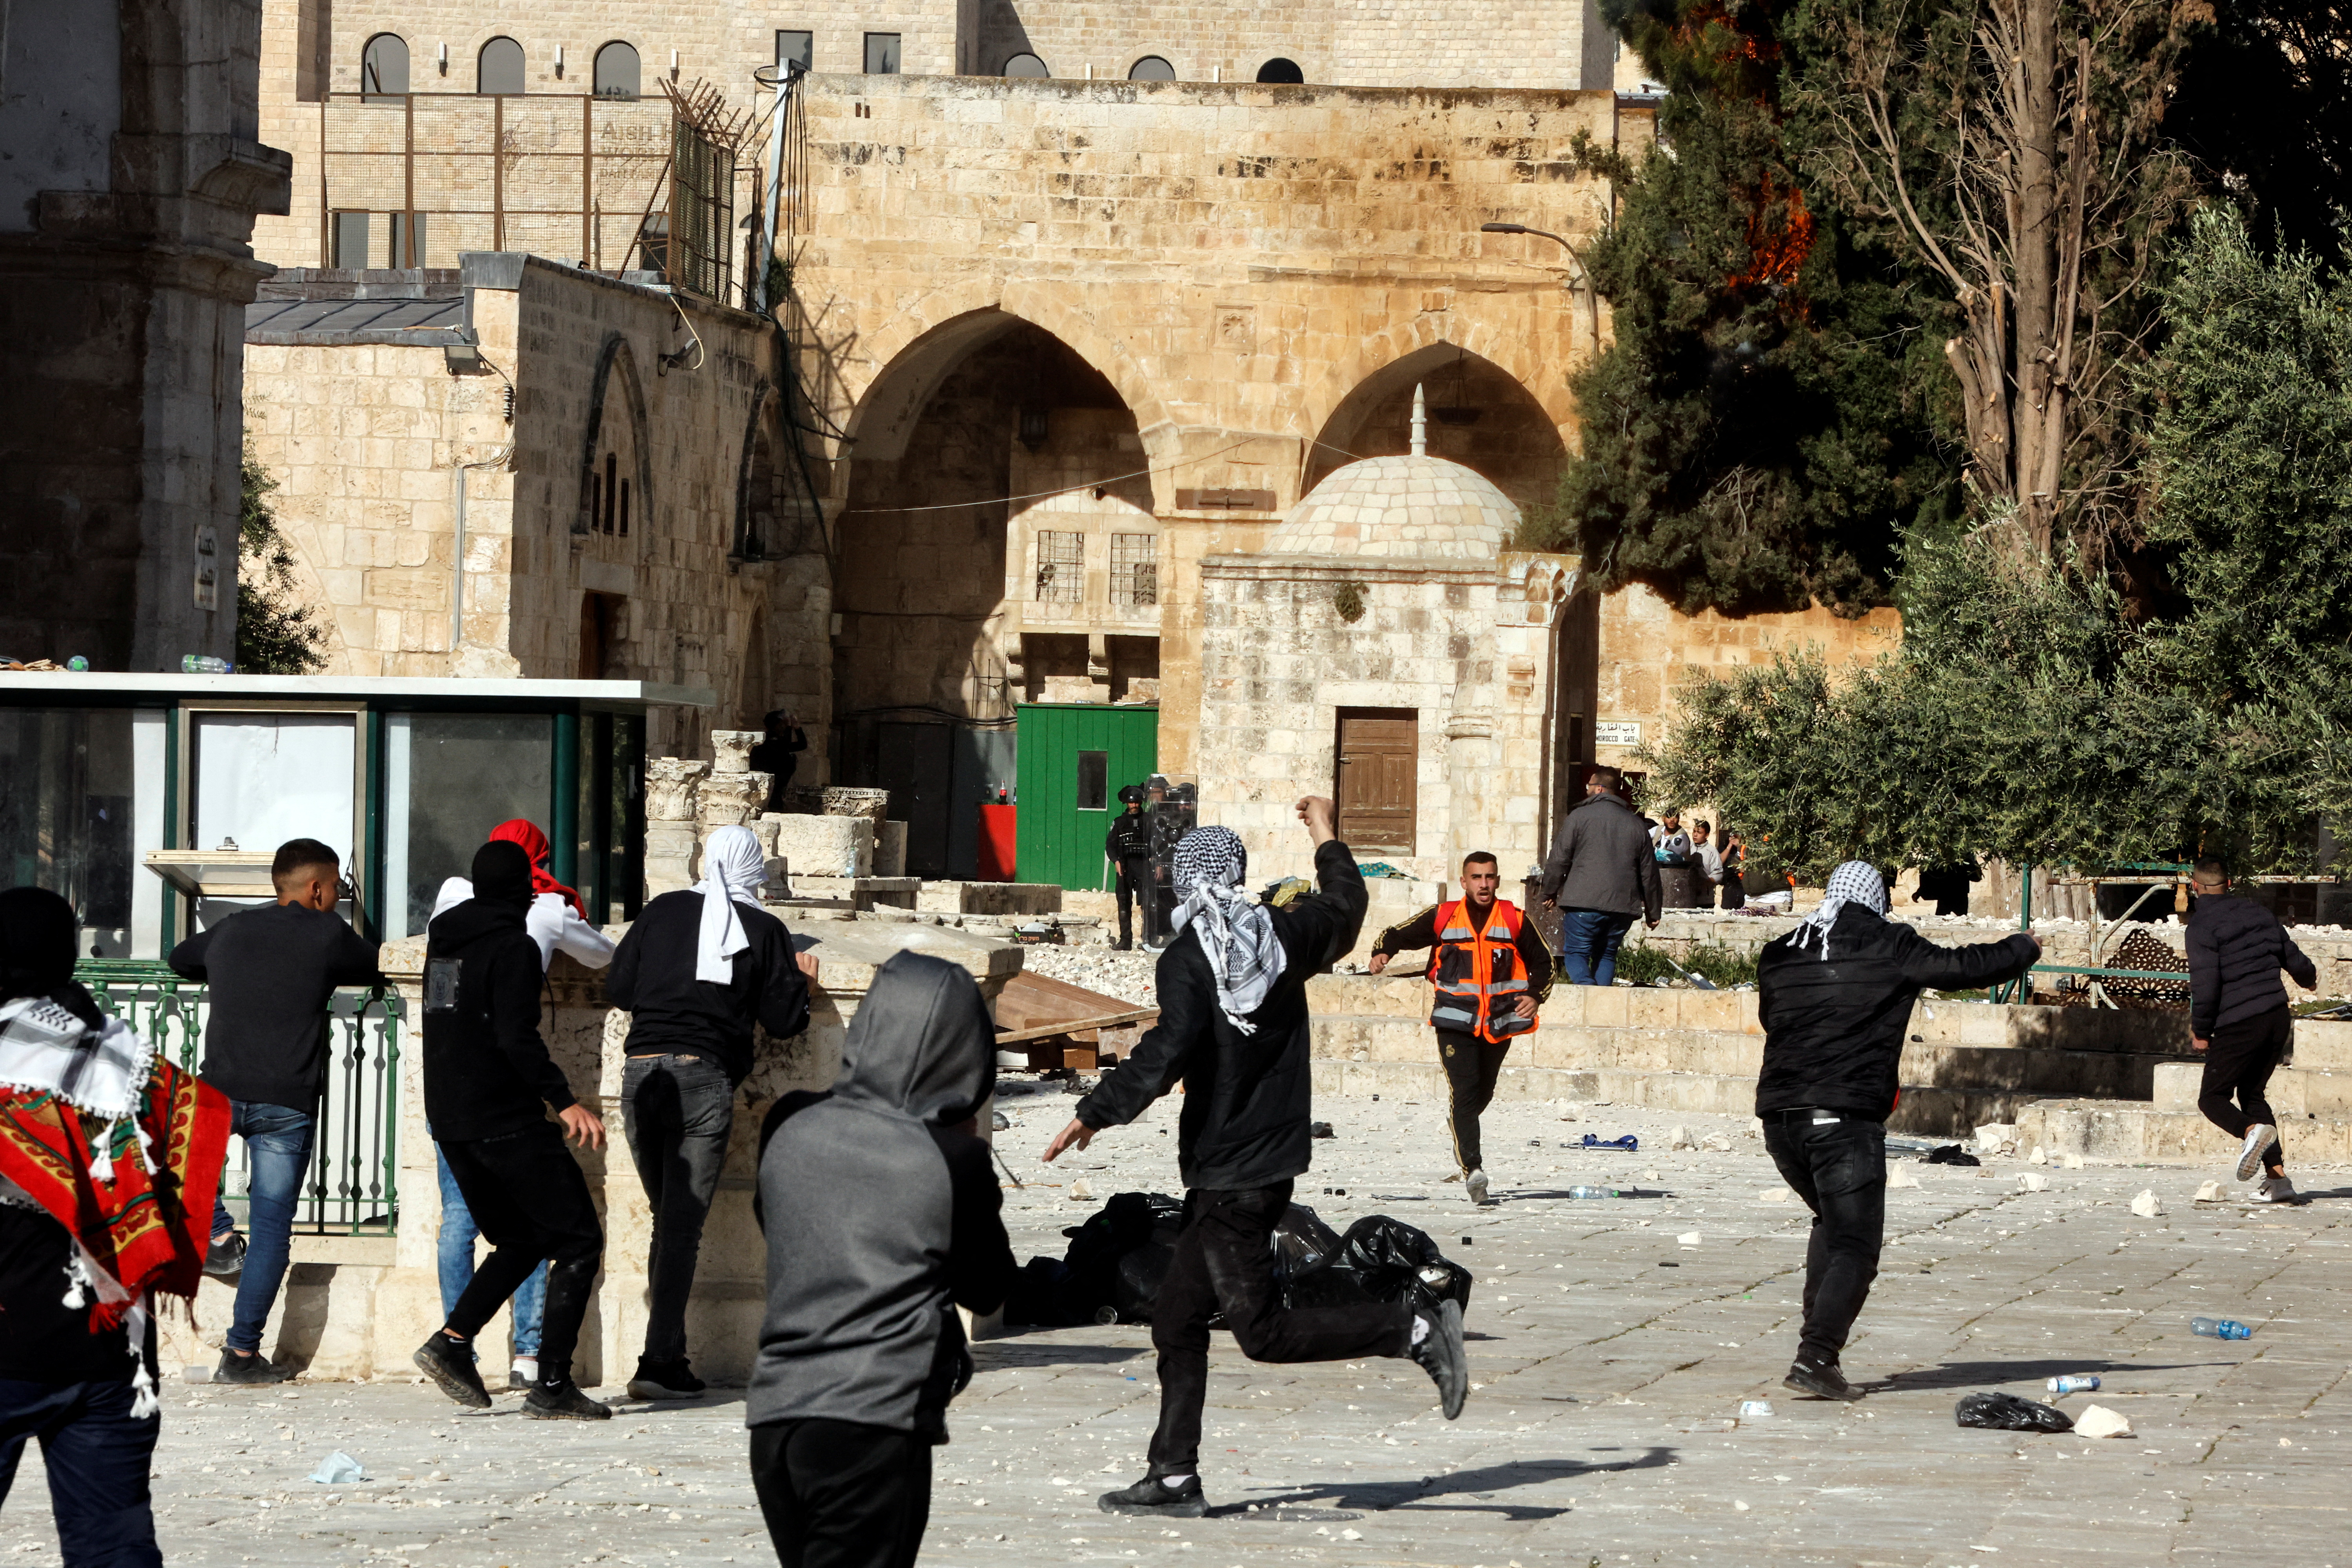 Palestinian protestors clash with Israeli security forces at the compound that houses Al-Aqsa Mosque, known to Muslims as Noble Sanctuary and to Jews as Temple Mount, in Jerusalem's Old City